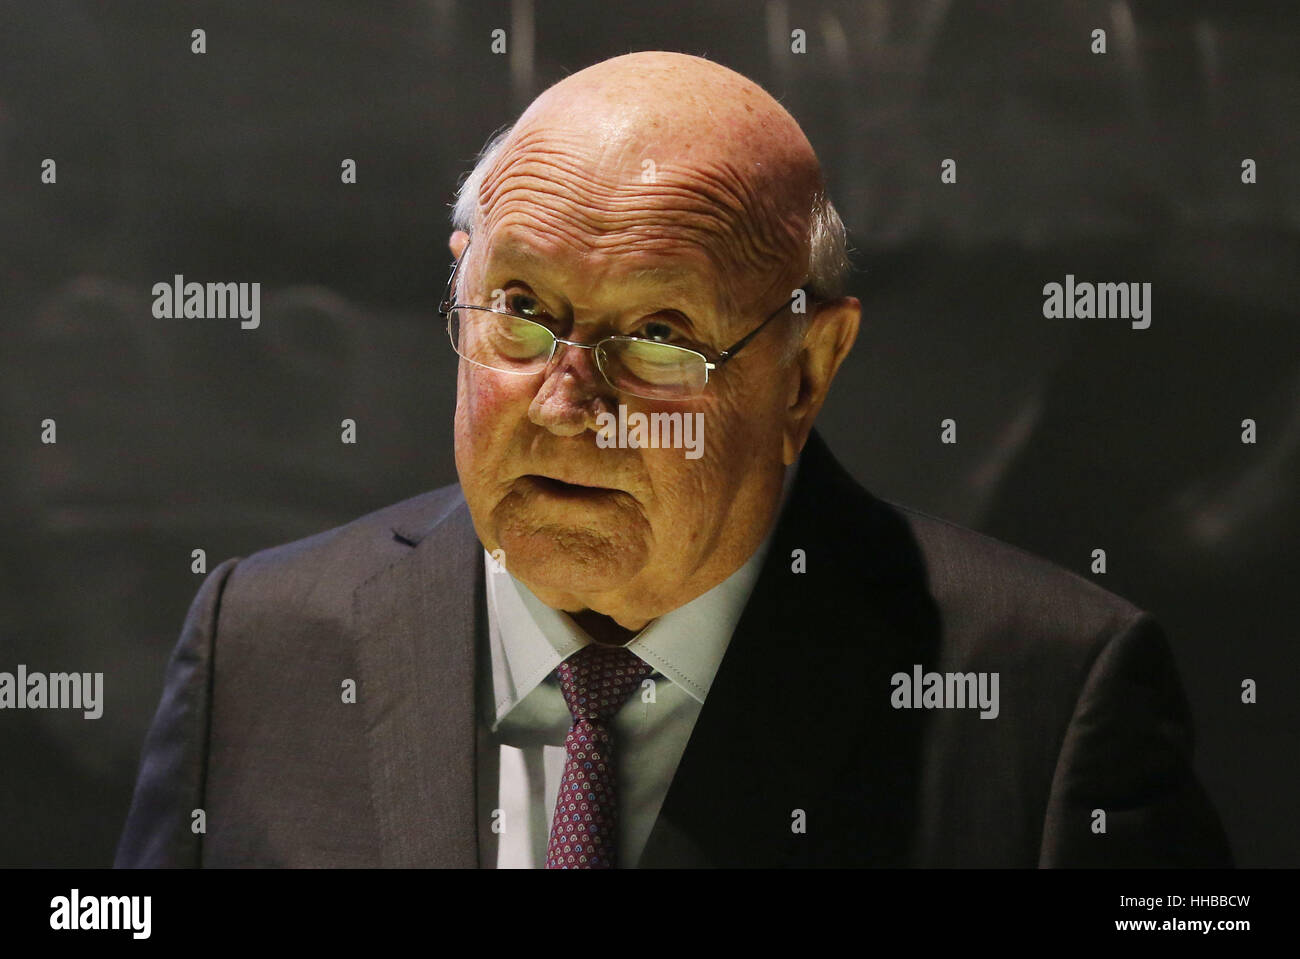 Nobel Peace Prize winner FW de Klerk addresses the Trinity College Law Society after he was presented with the Praeses Elit Award as a recognition of his key role in ending apartheid and his outstanding contribution to reconciliation in South Africa. Stock Photo